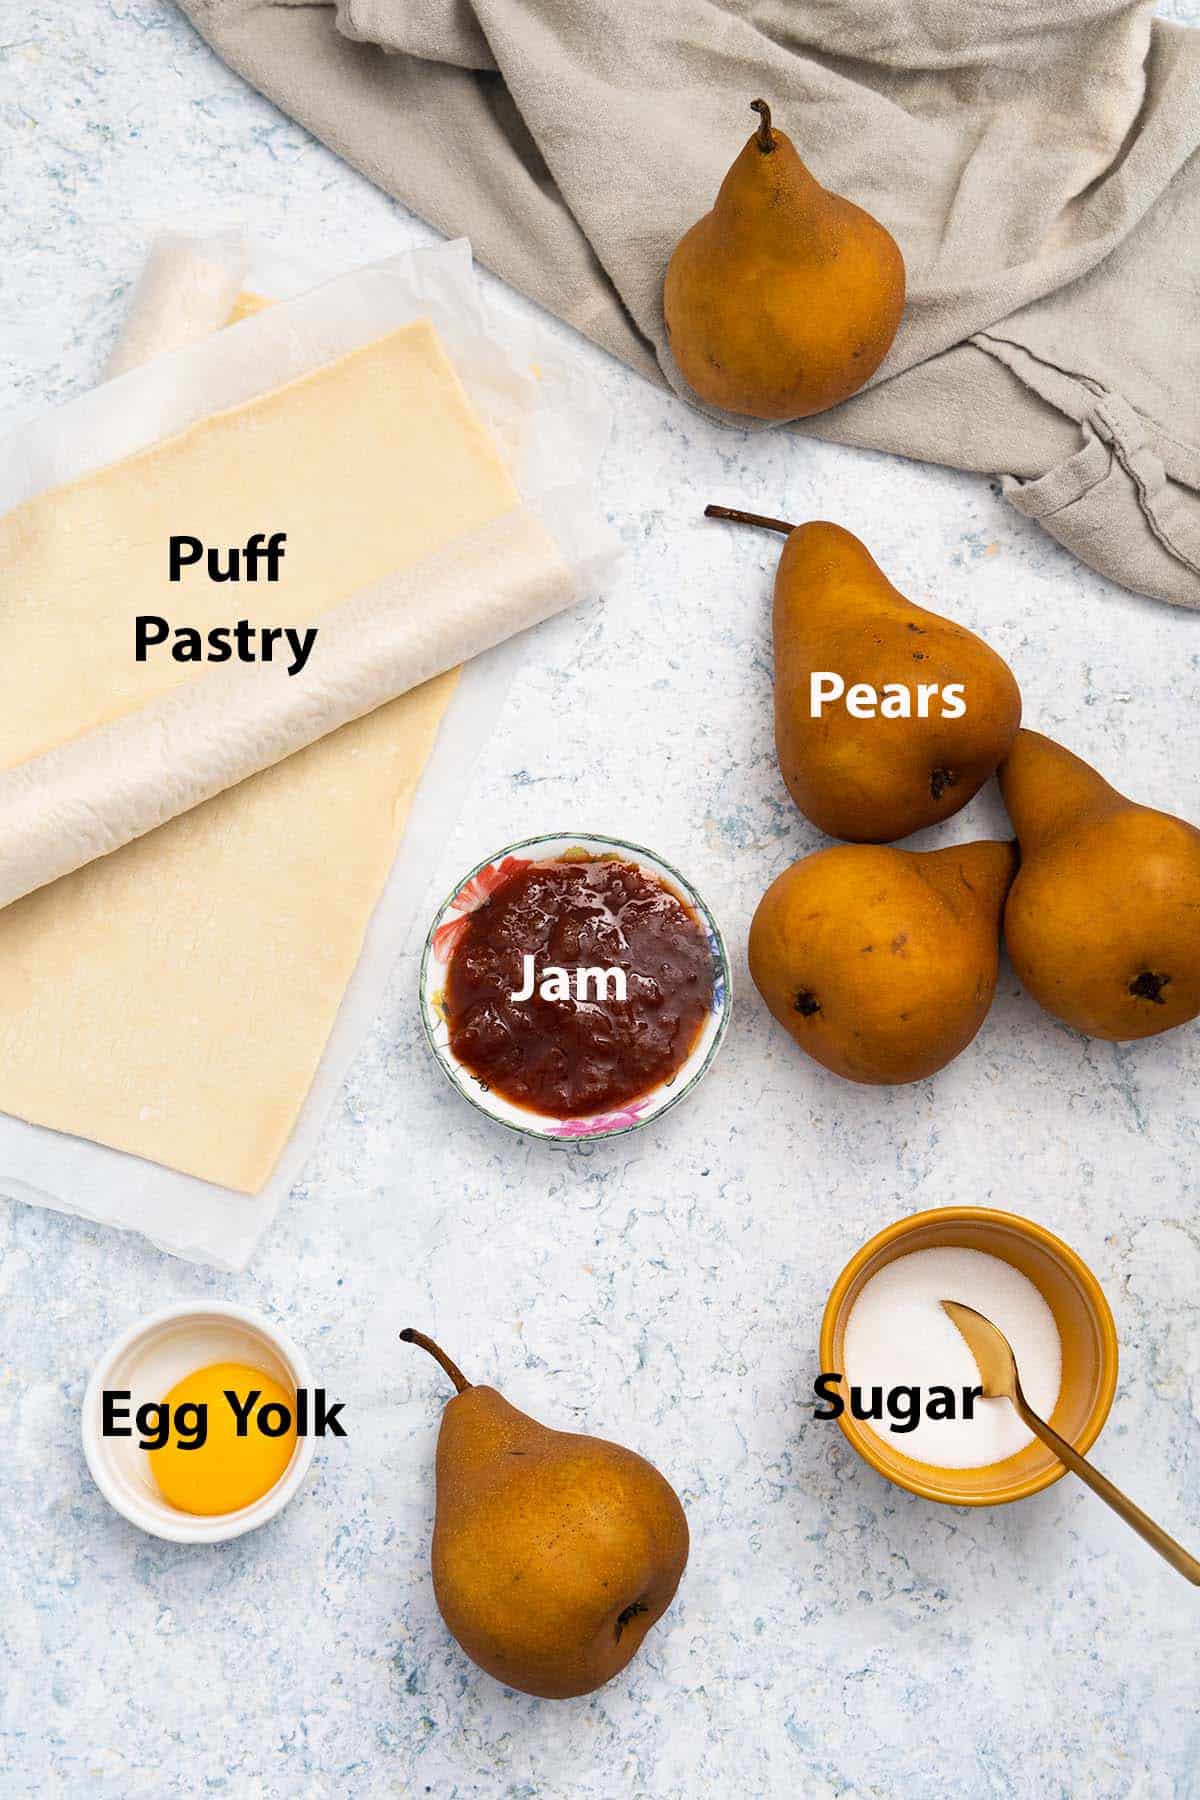 labelled ingredients: puff pastry, pears, jam, egg yolk and sugar.